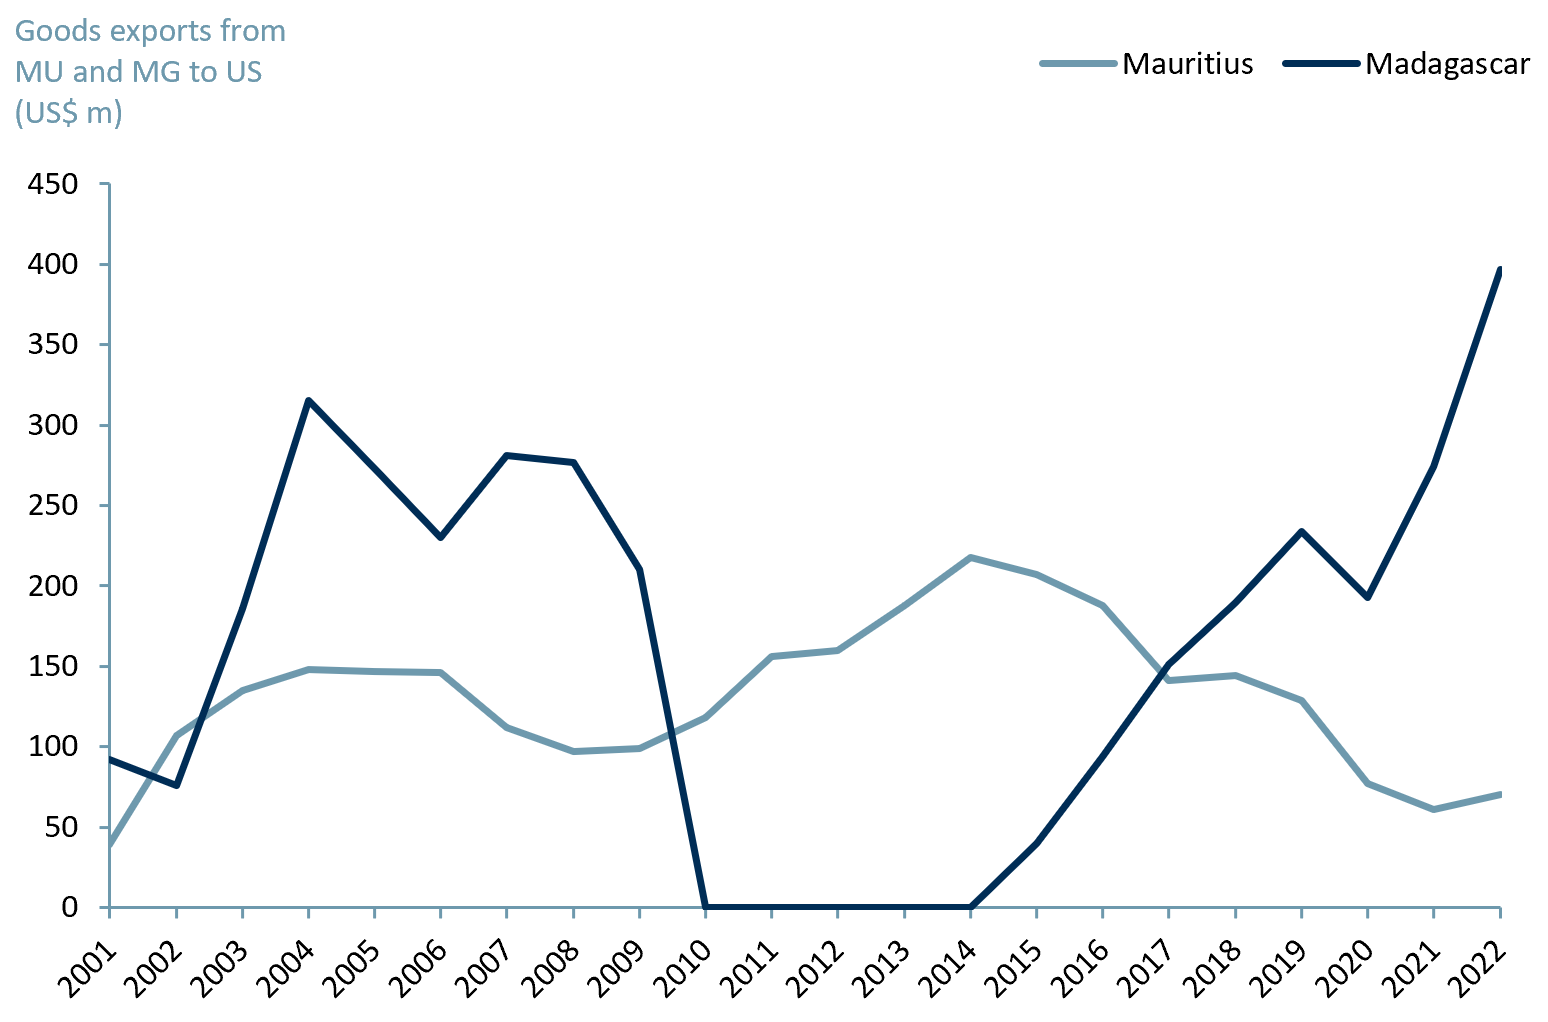 Apparel exports from Mauritius & Madagascar to US under AGOA, 2000-2022